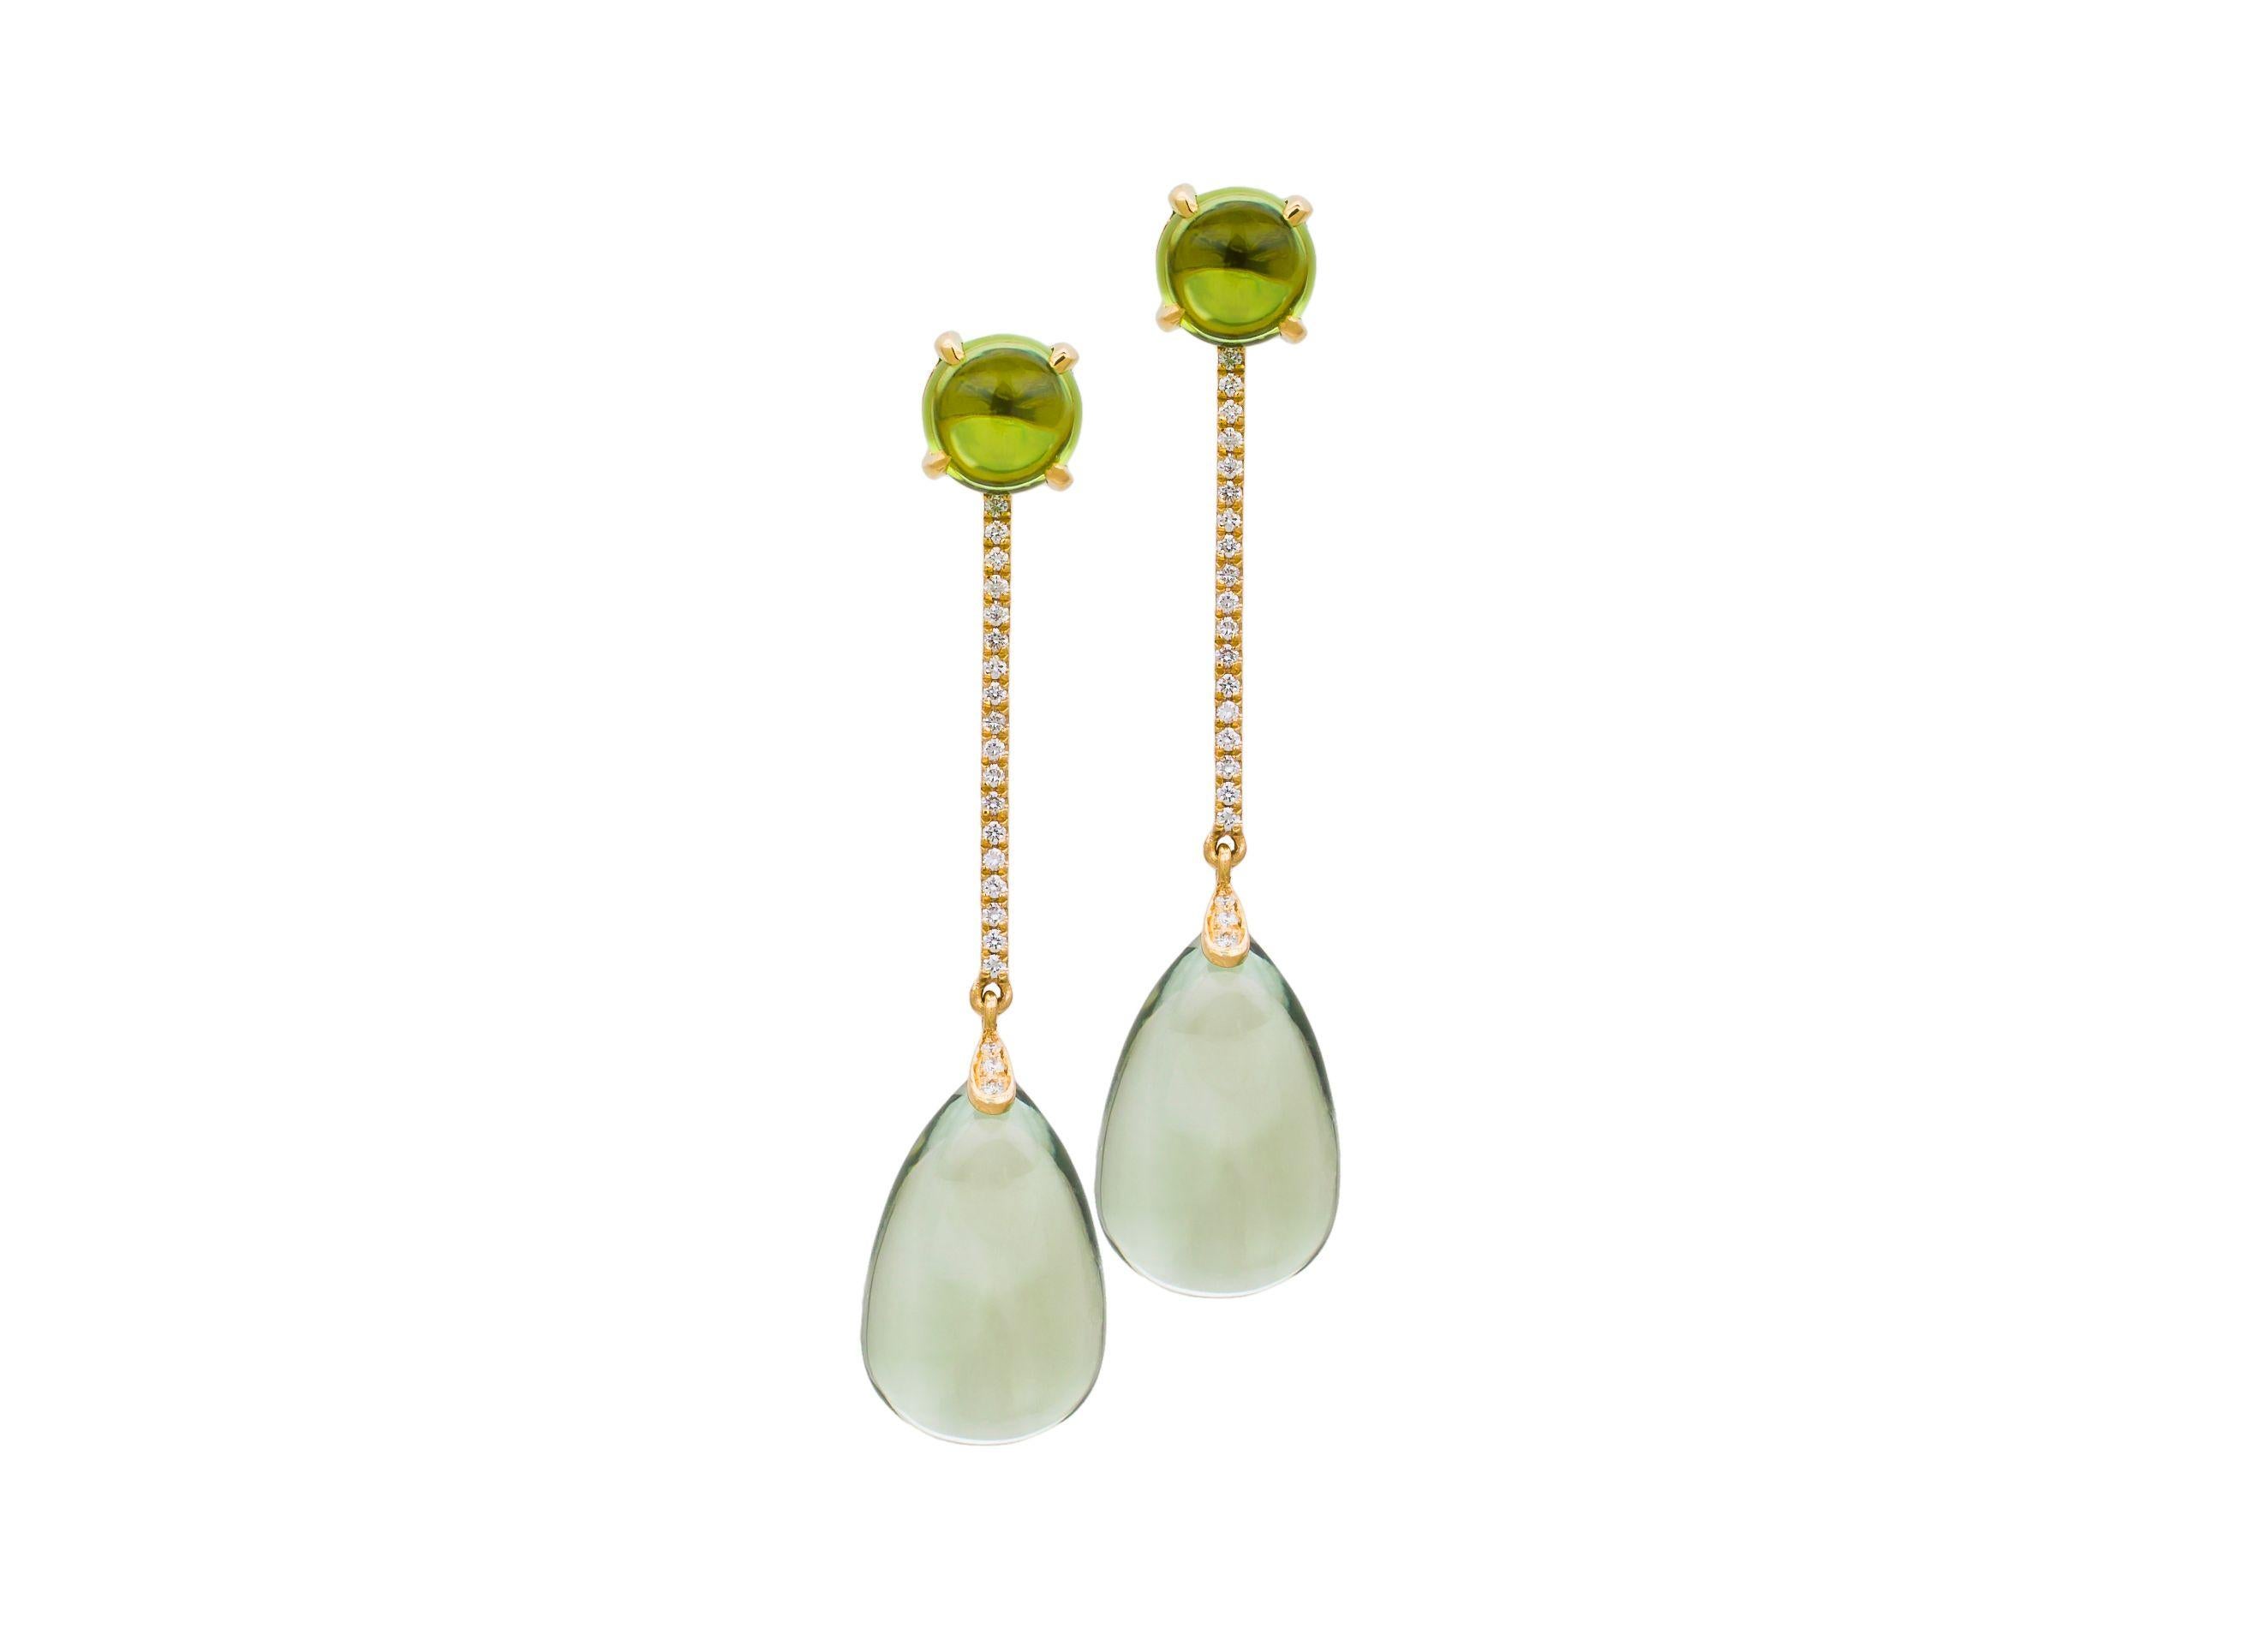 Prasiolite & Peridot Long Drop Earrings with Diamonds in 18K Yellow Gold from 'Naughty' Collection
 Stone Size: 19 x 12 mm & 8 mm
 Diamonds: G-H / VS, Approx Wt:0.28 Cts